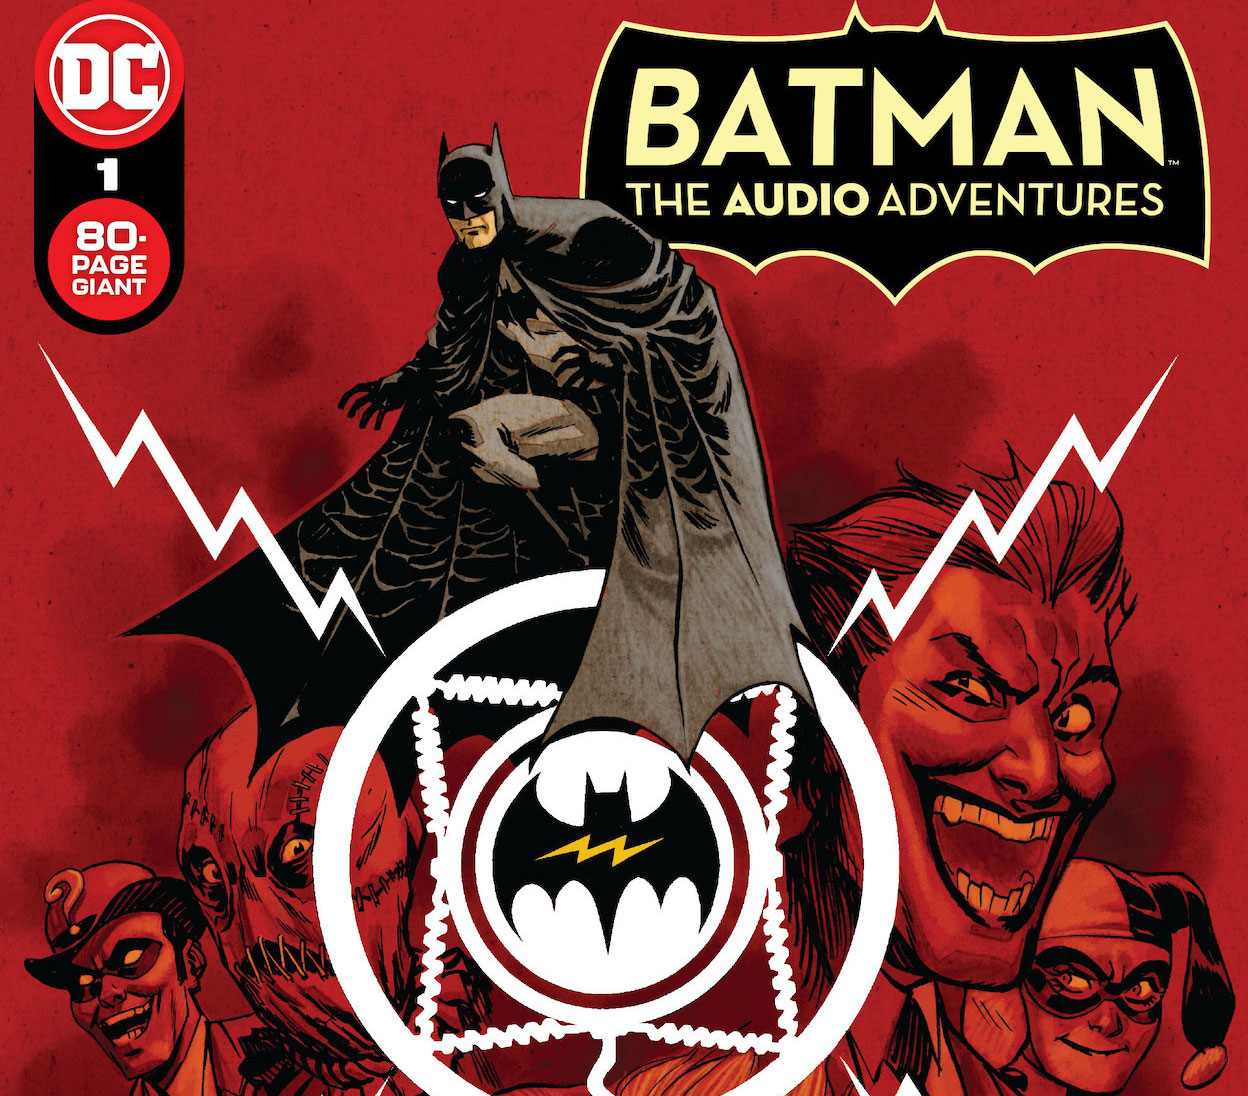 'Batman: The Audio Adventures Special' #1 is having a lot of fun